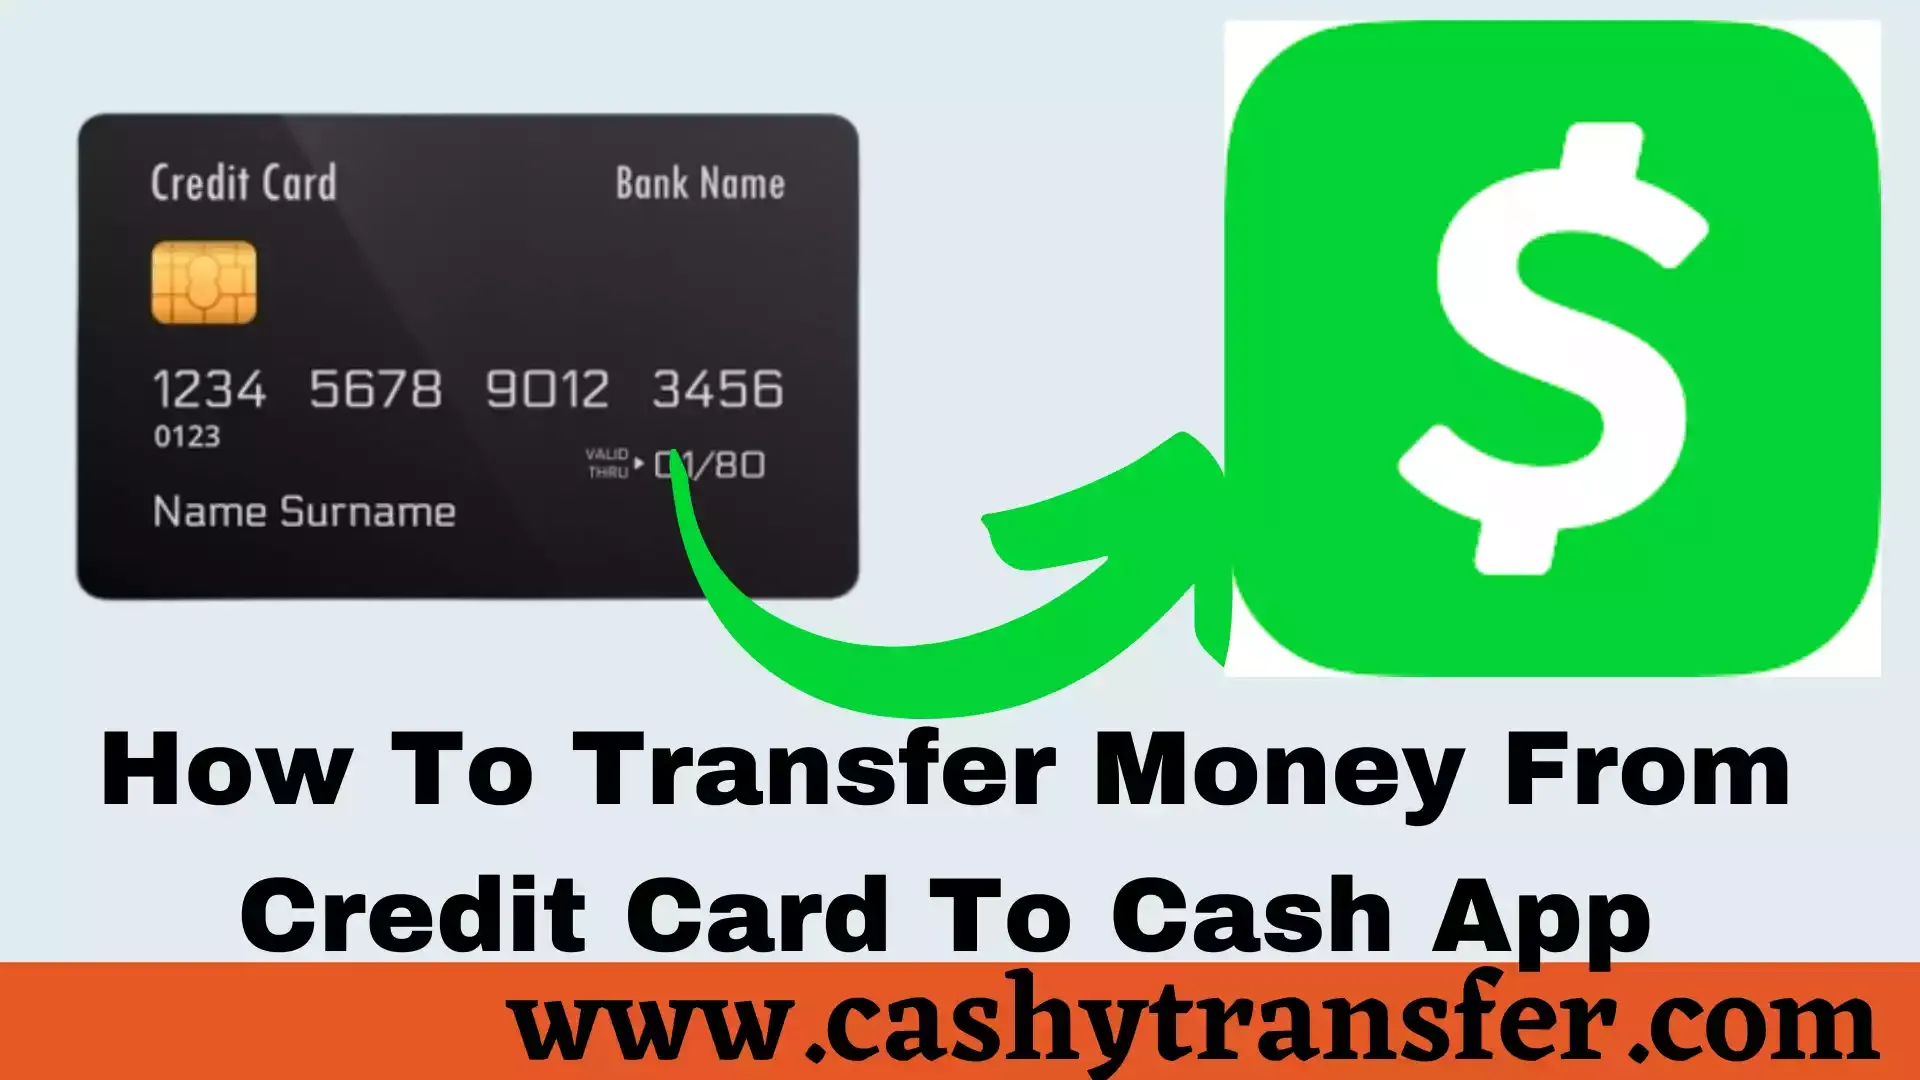 Transfer Money From Credit Card To Cash App